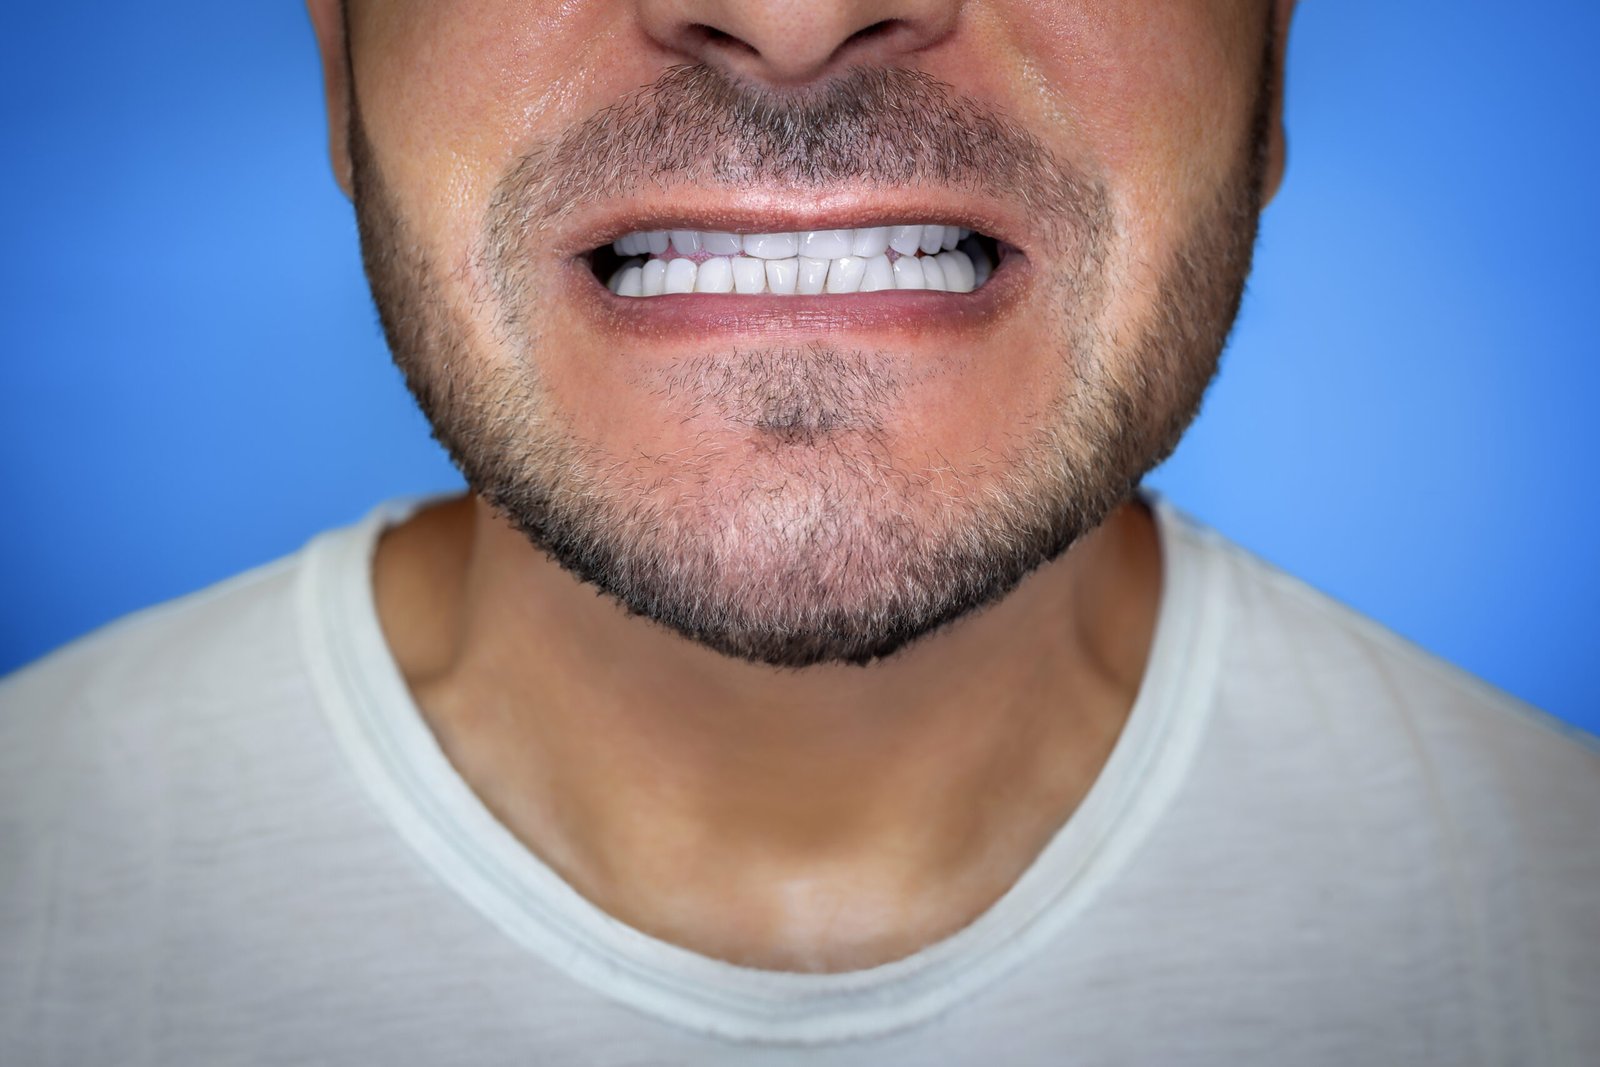 A man after teeth whitening on colored background, close-up.